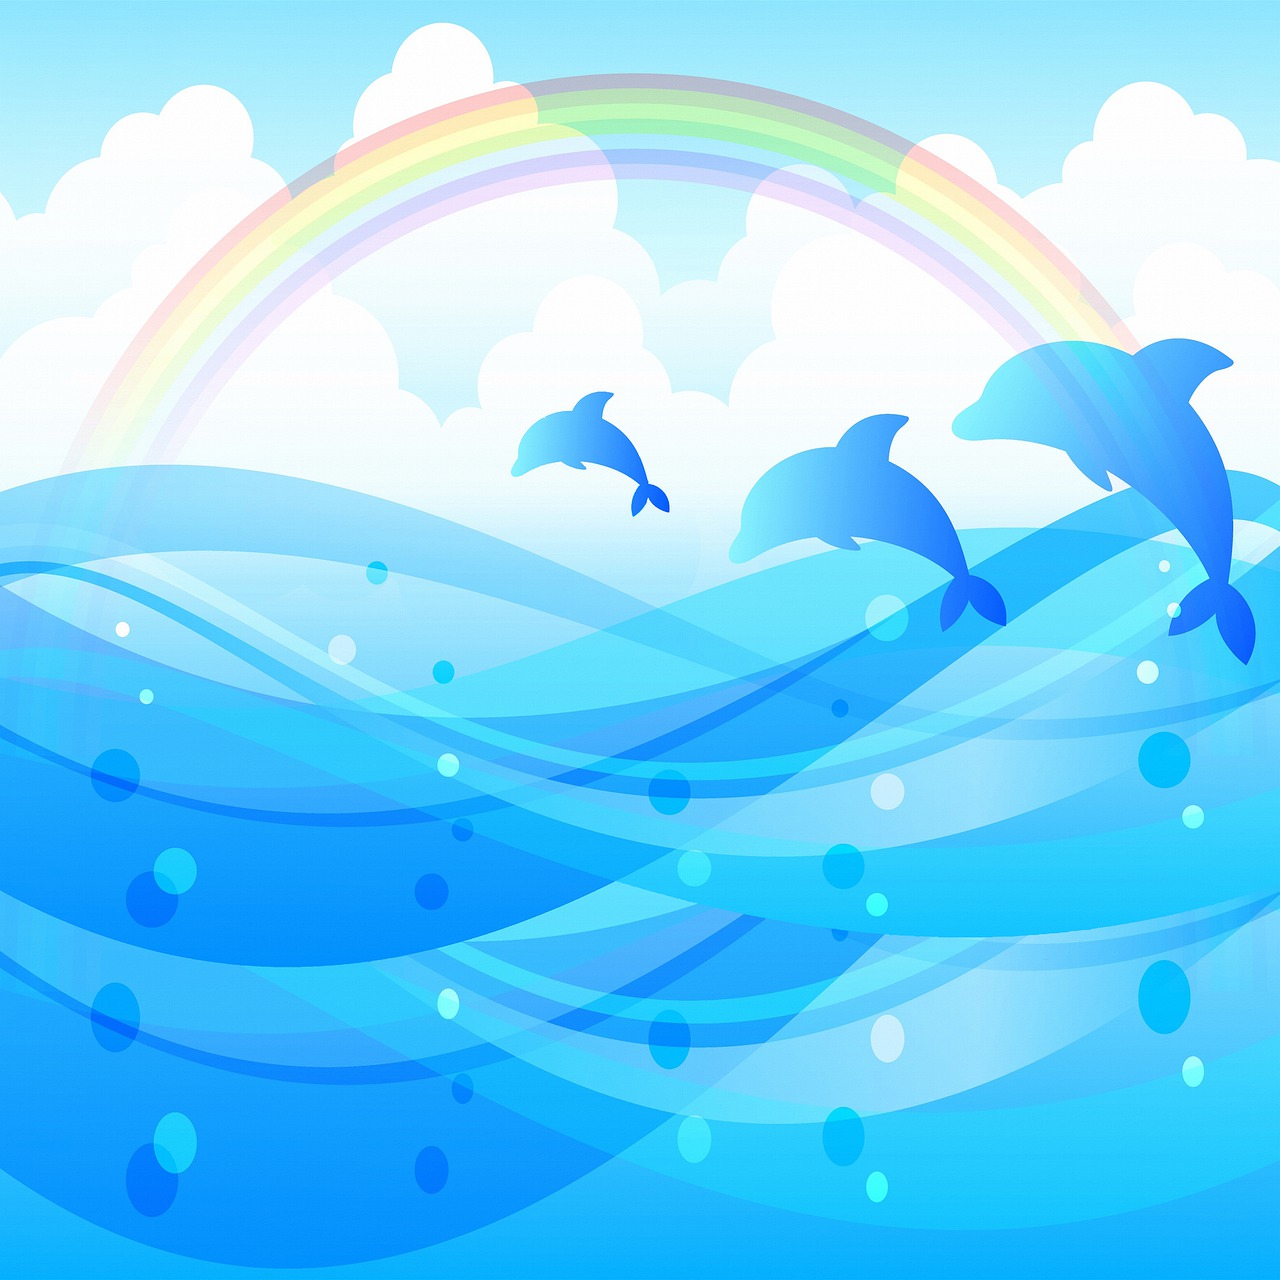 two dolphins jumping out of the water with a rainbow in the background, an illustration of, water torrent background, azure blue sky, random background scene, blurry and dreamy illustration